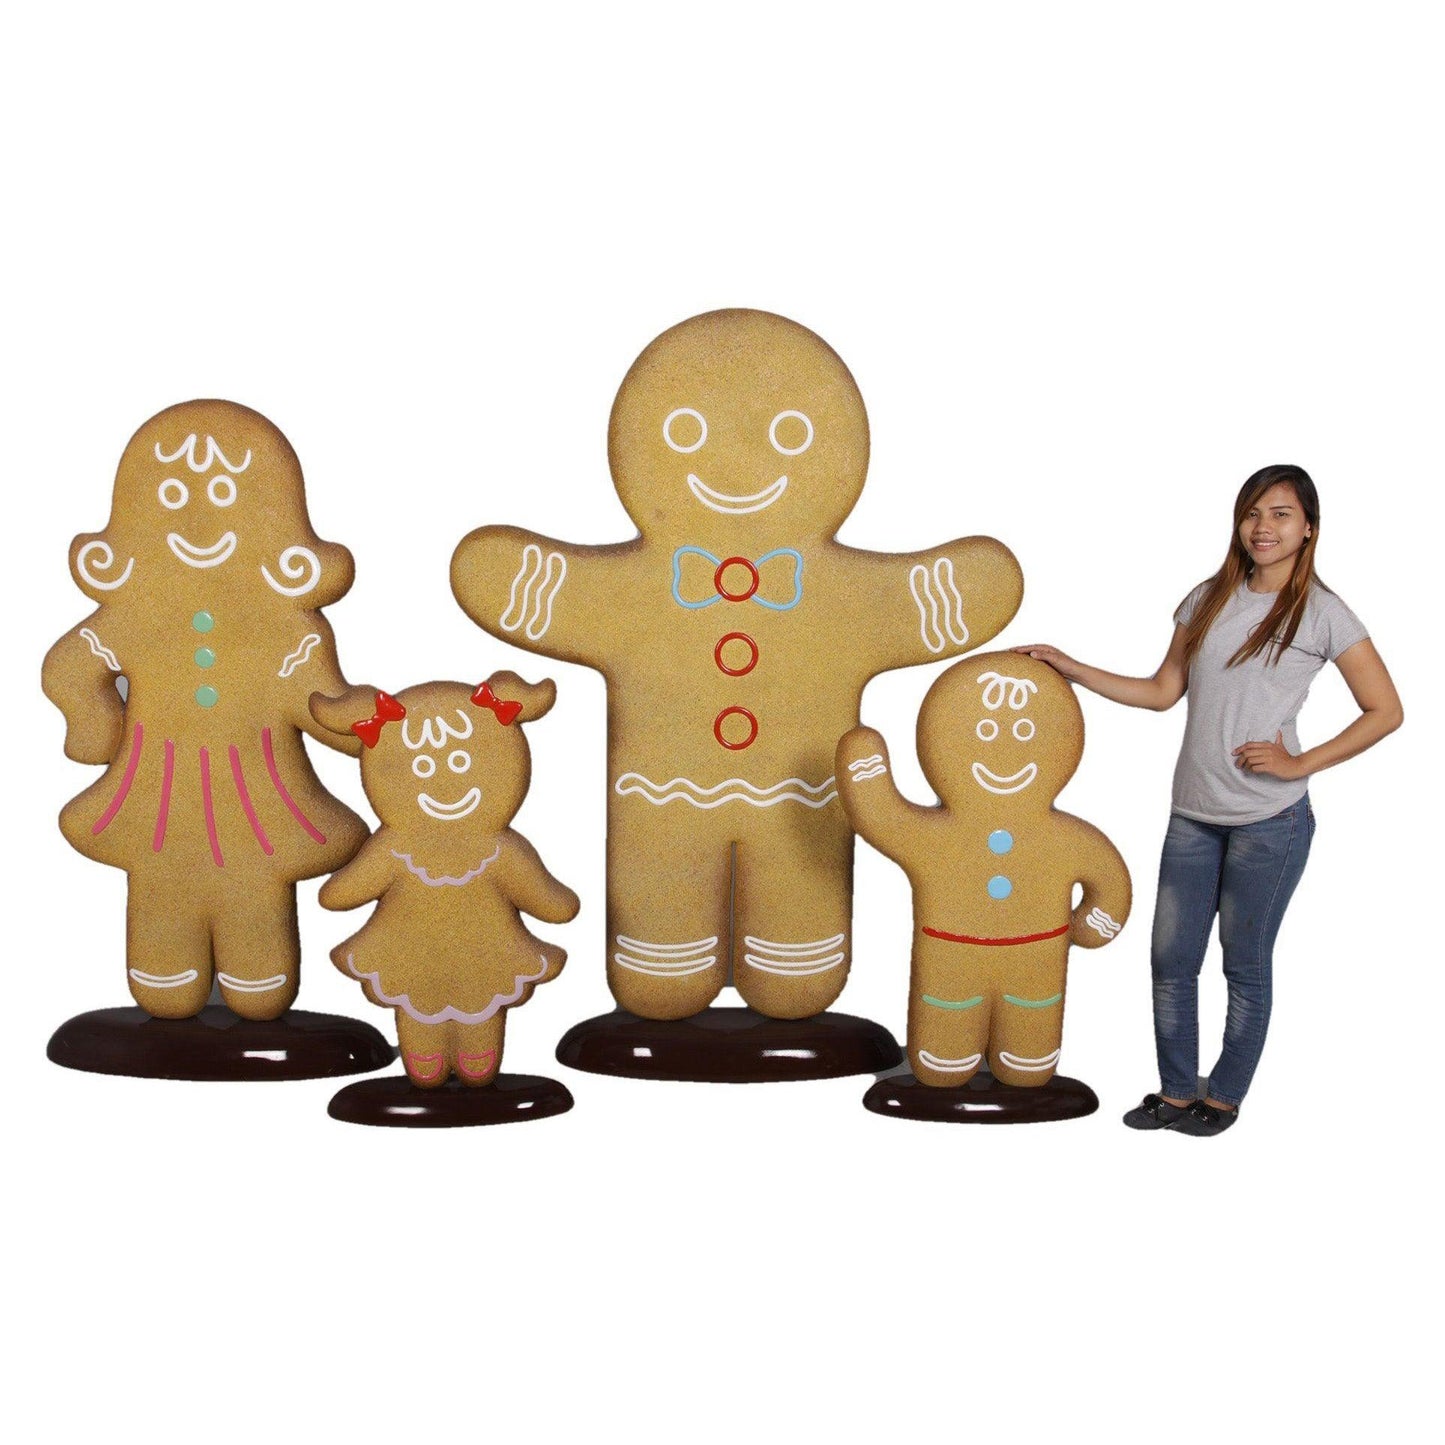 Man Gingerbread Cookie Statue